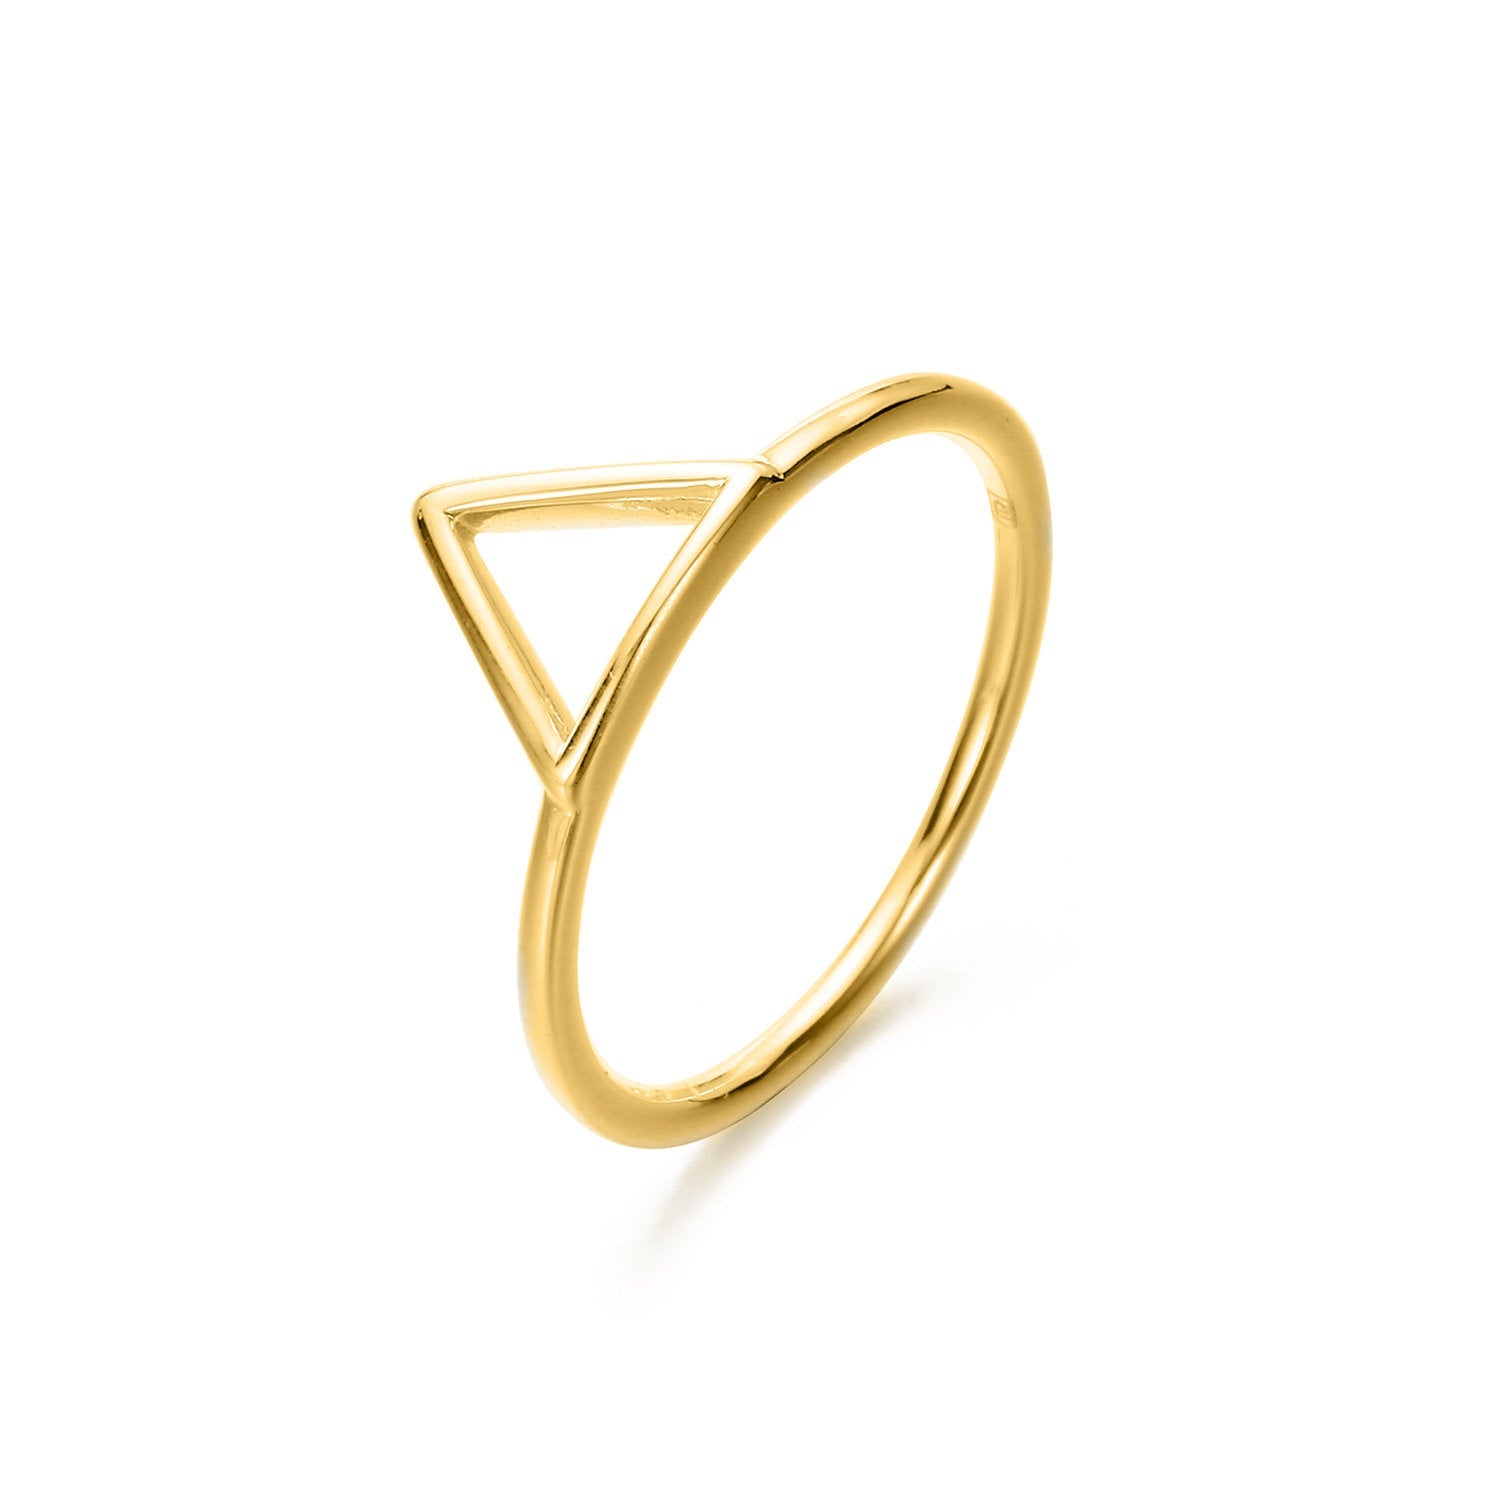 STACKABLE MINIMALIST RINGS SET - Ora Gift